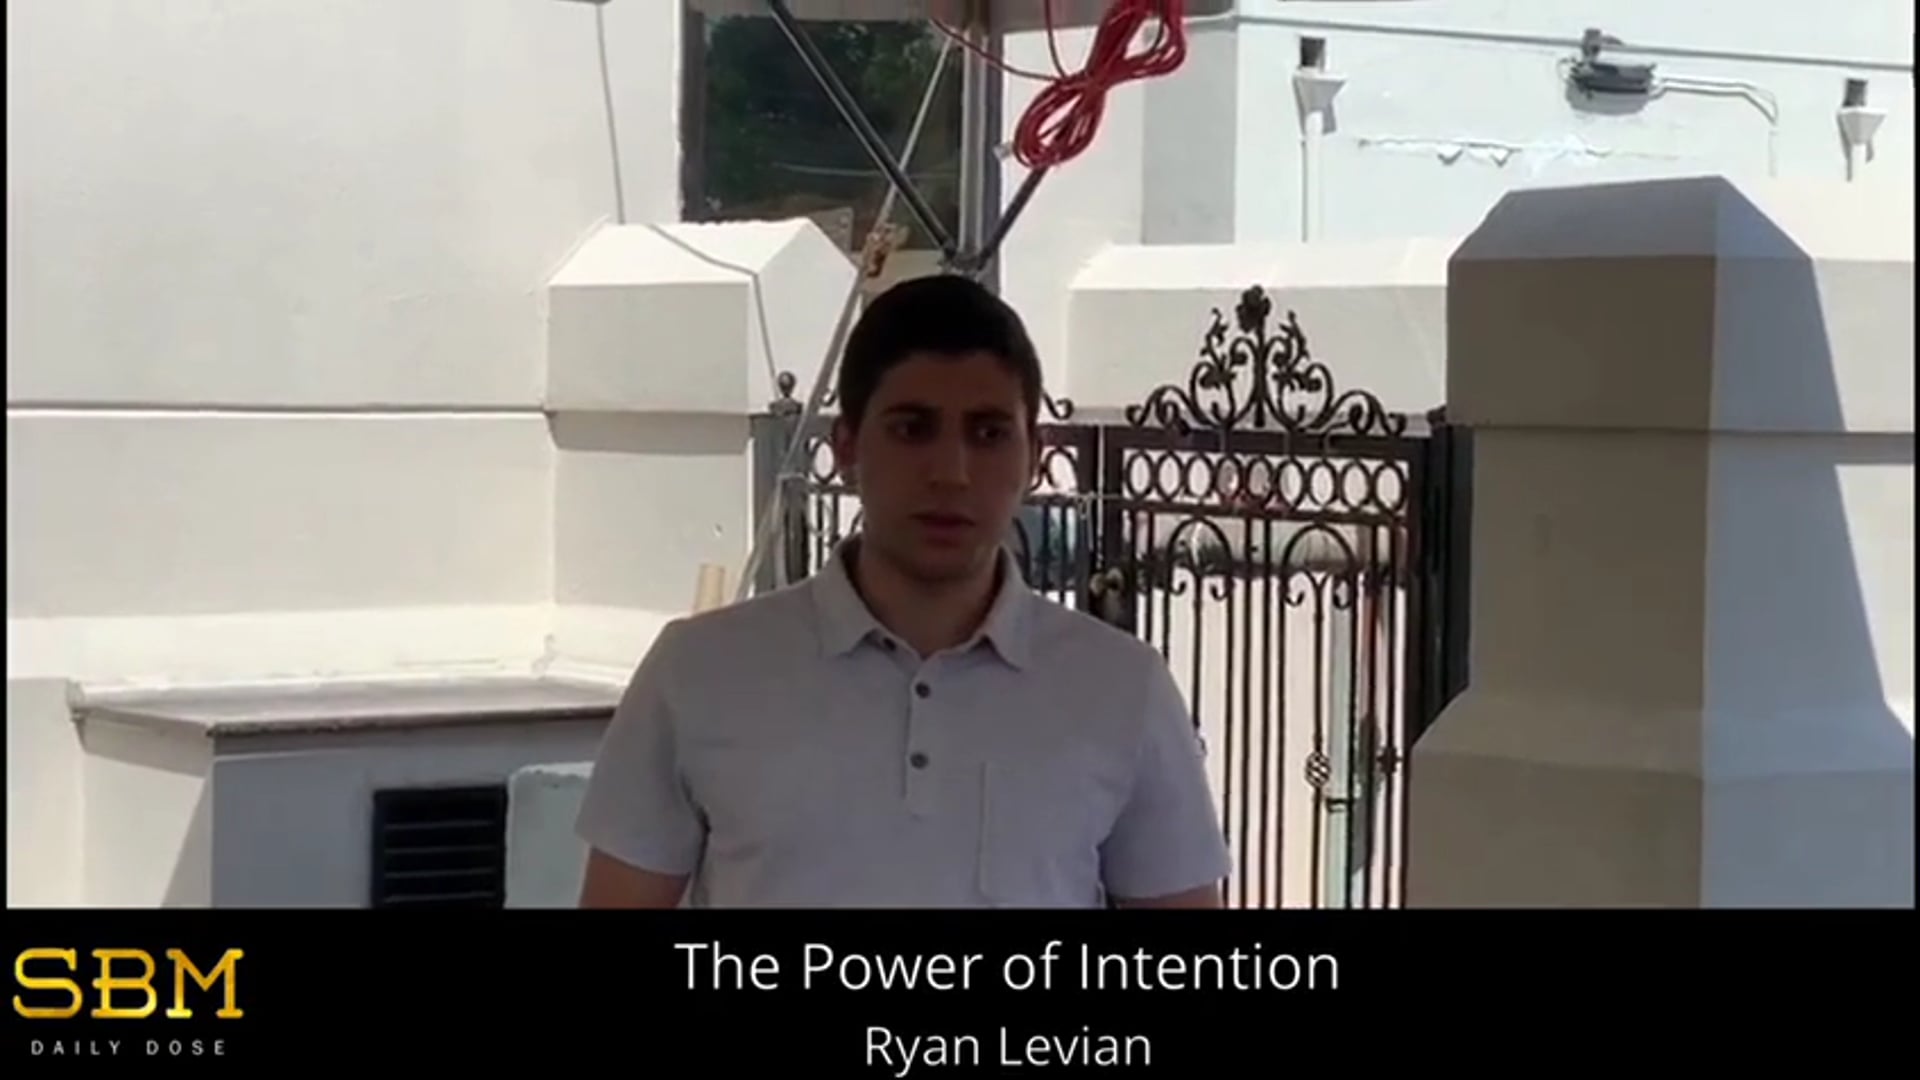 The Power of Intention - Ryan Levian